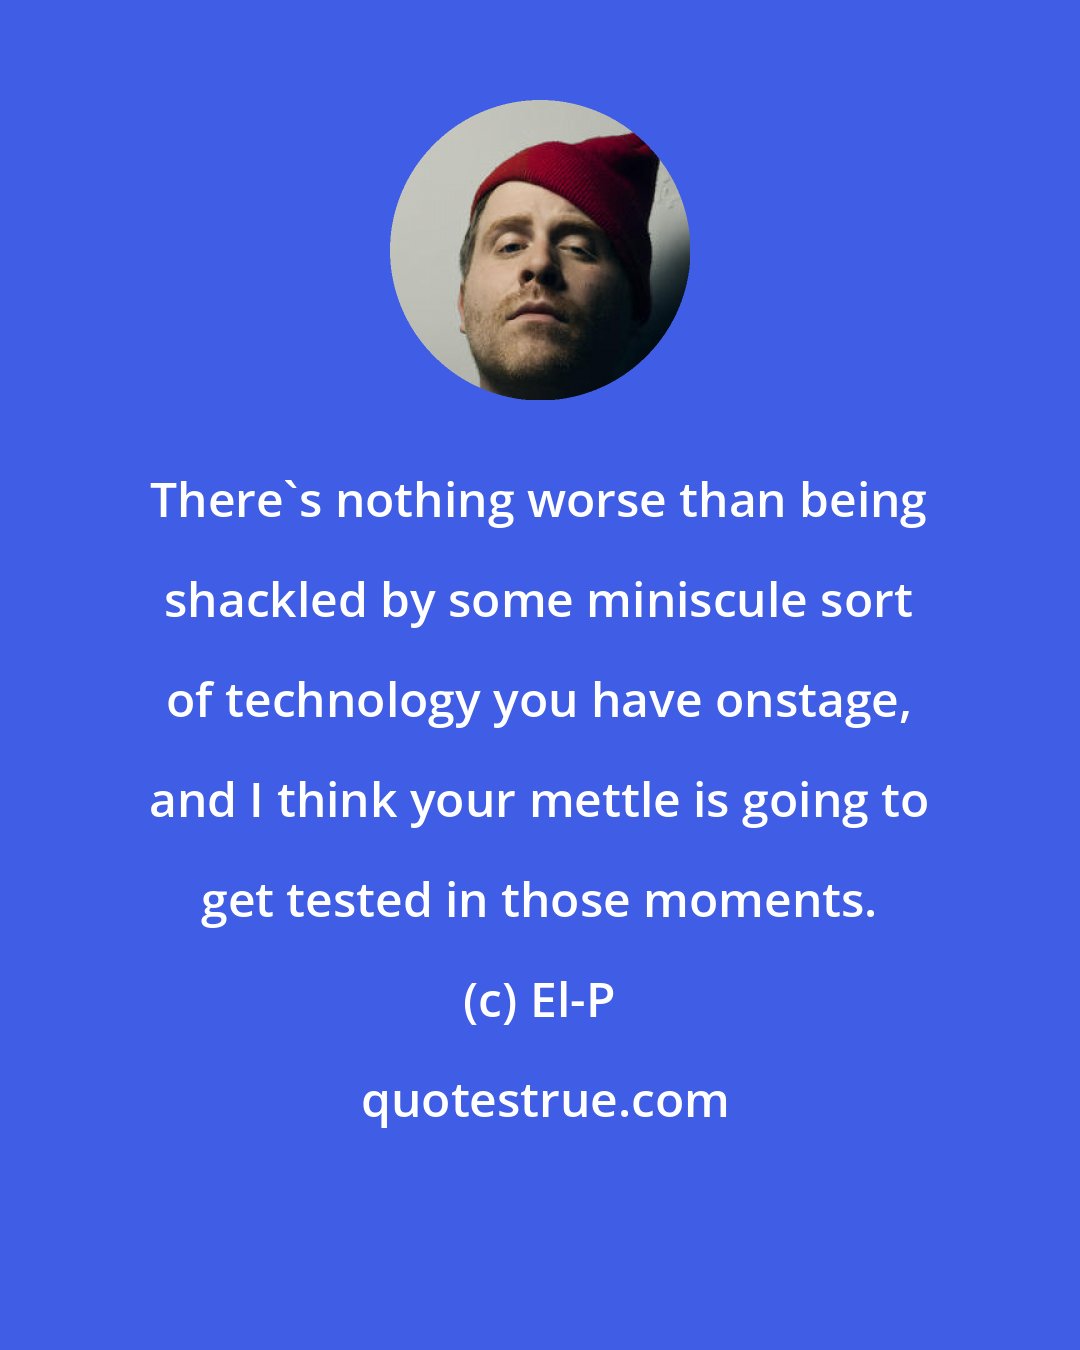 El-P: There's nothing worse than being shackled by some miniscule sort of technology you have onstage, and I think your mettle is going to get tested in those moments.